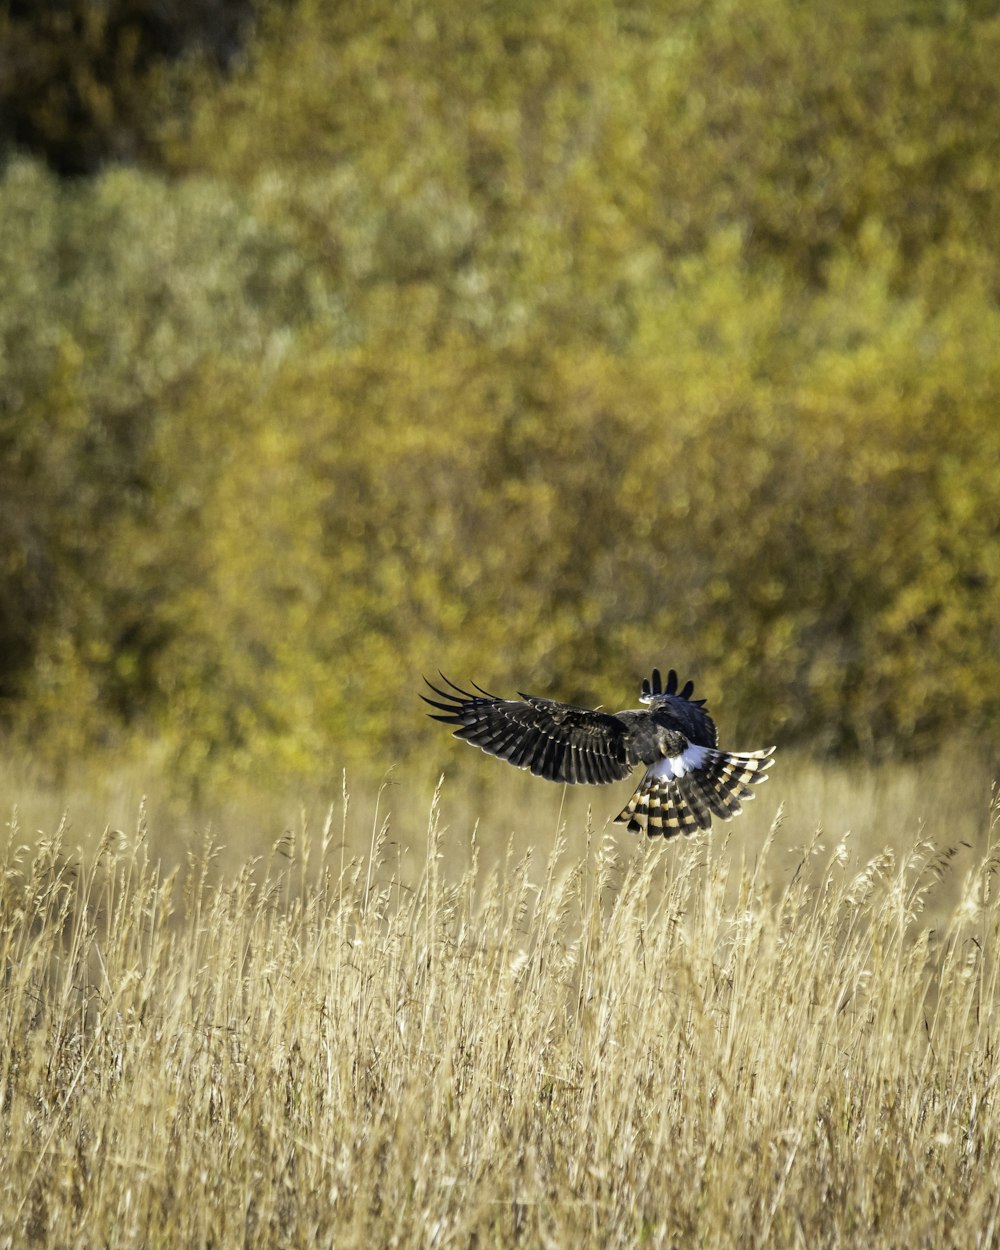 black and white bird flying over brown grass field during daytime